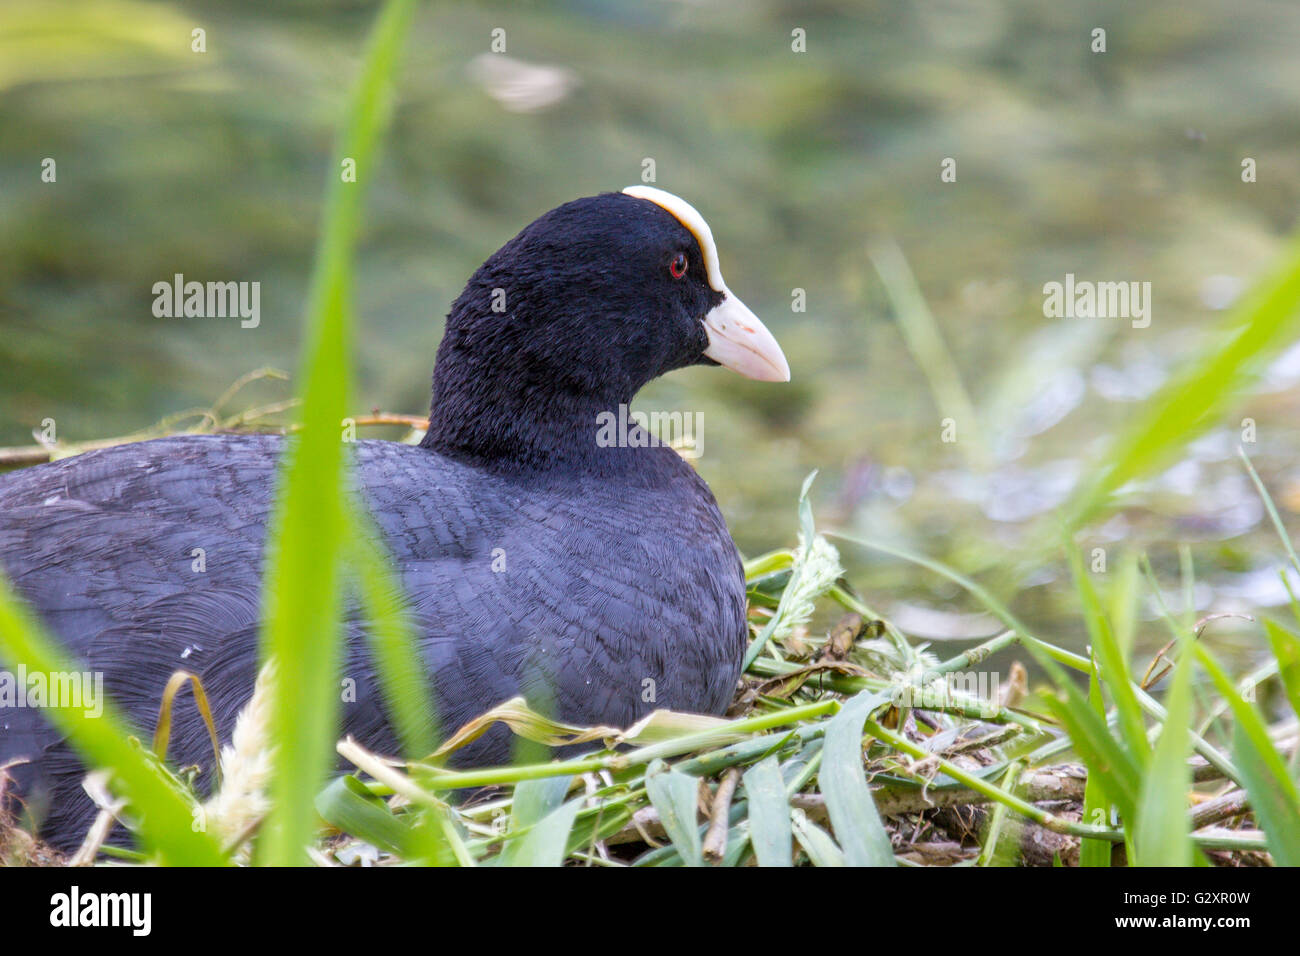 An Eurasian coot, Fulica atra, on its nest hatching eggs. This species builds a nest of dead reeds or grasses near the water's e Stock Photo